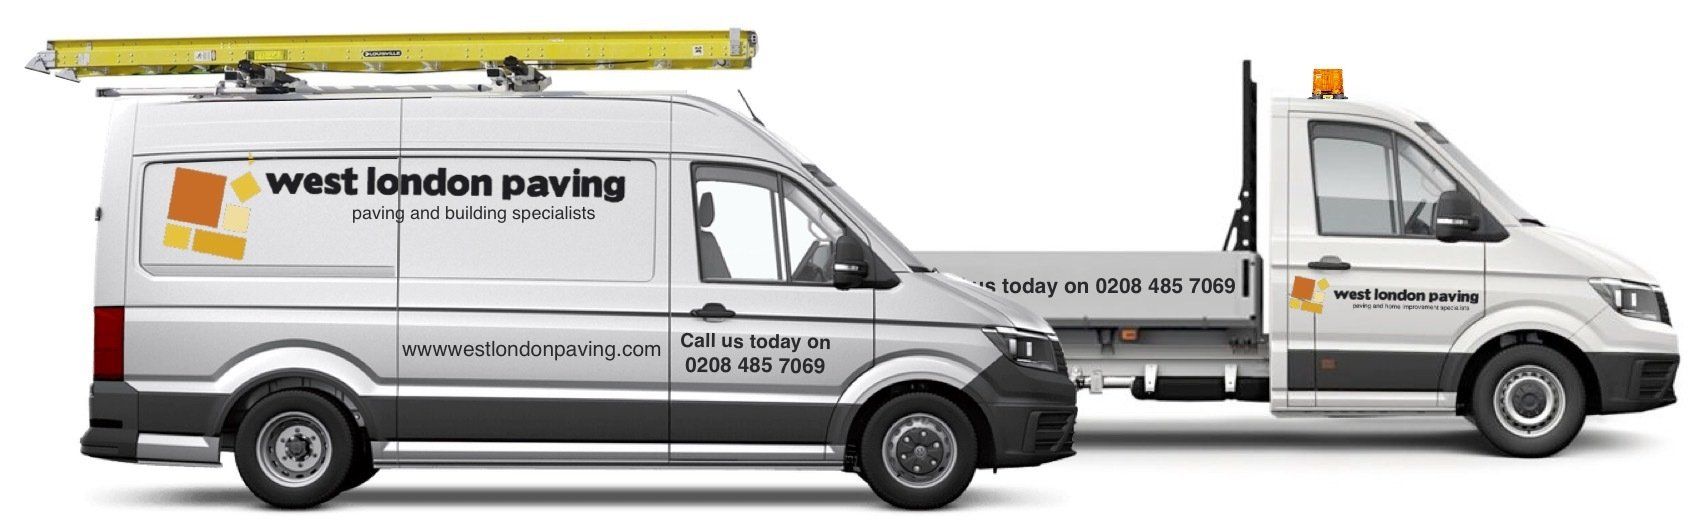 West London Paving Acton are paving, building and roofing specialists working in Acton and throughout west London